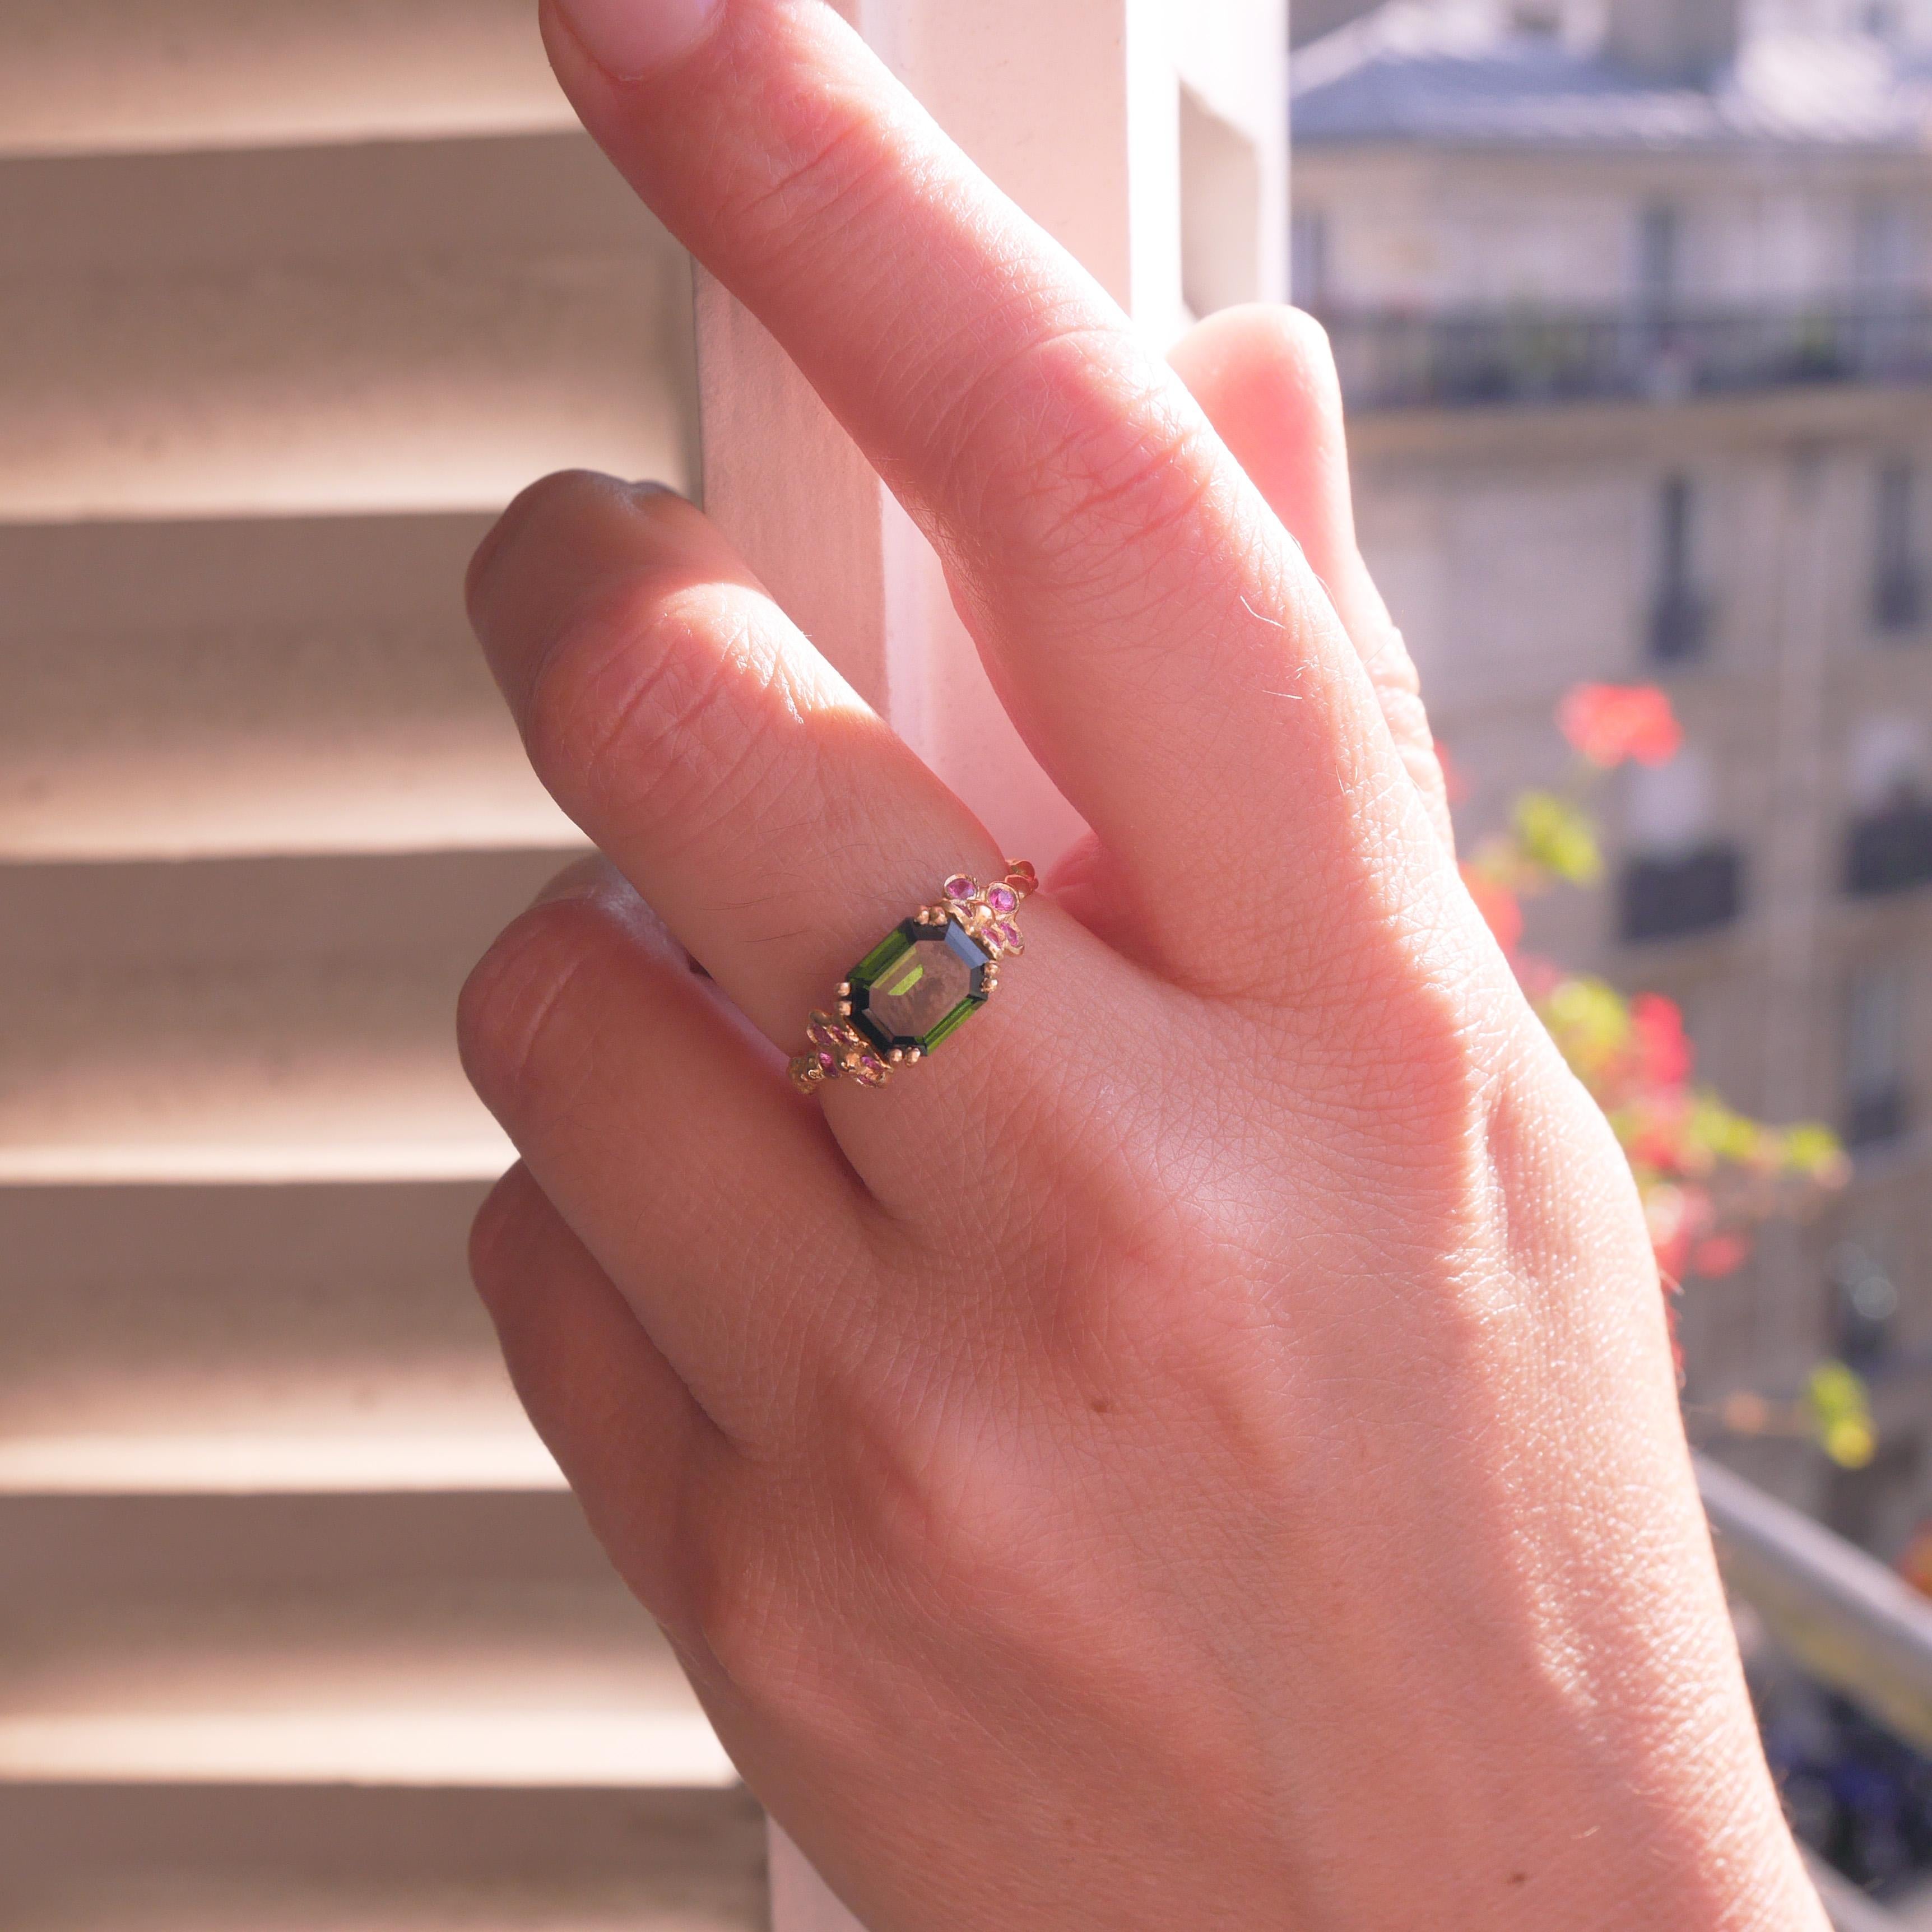 This ring is meticulously sculptured and cast from 18 Karat yellow gold and its weight is approximately 3.5 grams. 
It is set with green tourmaline and pink sapphires.
French size 54 / 6,5 US size.
It can be made to size upon request.
The